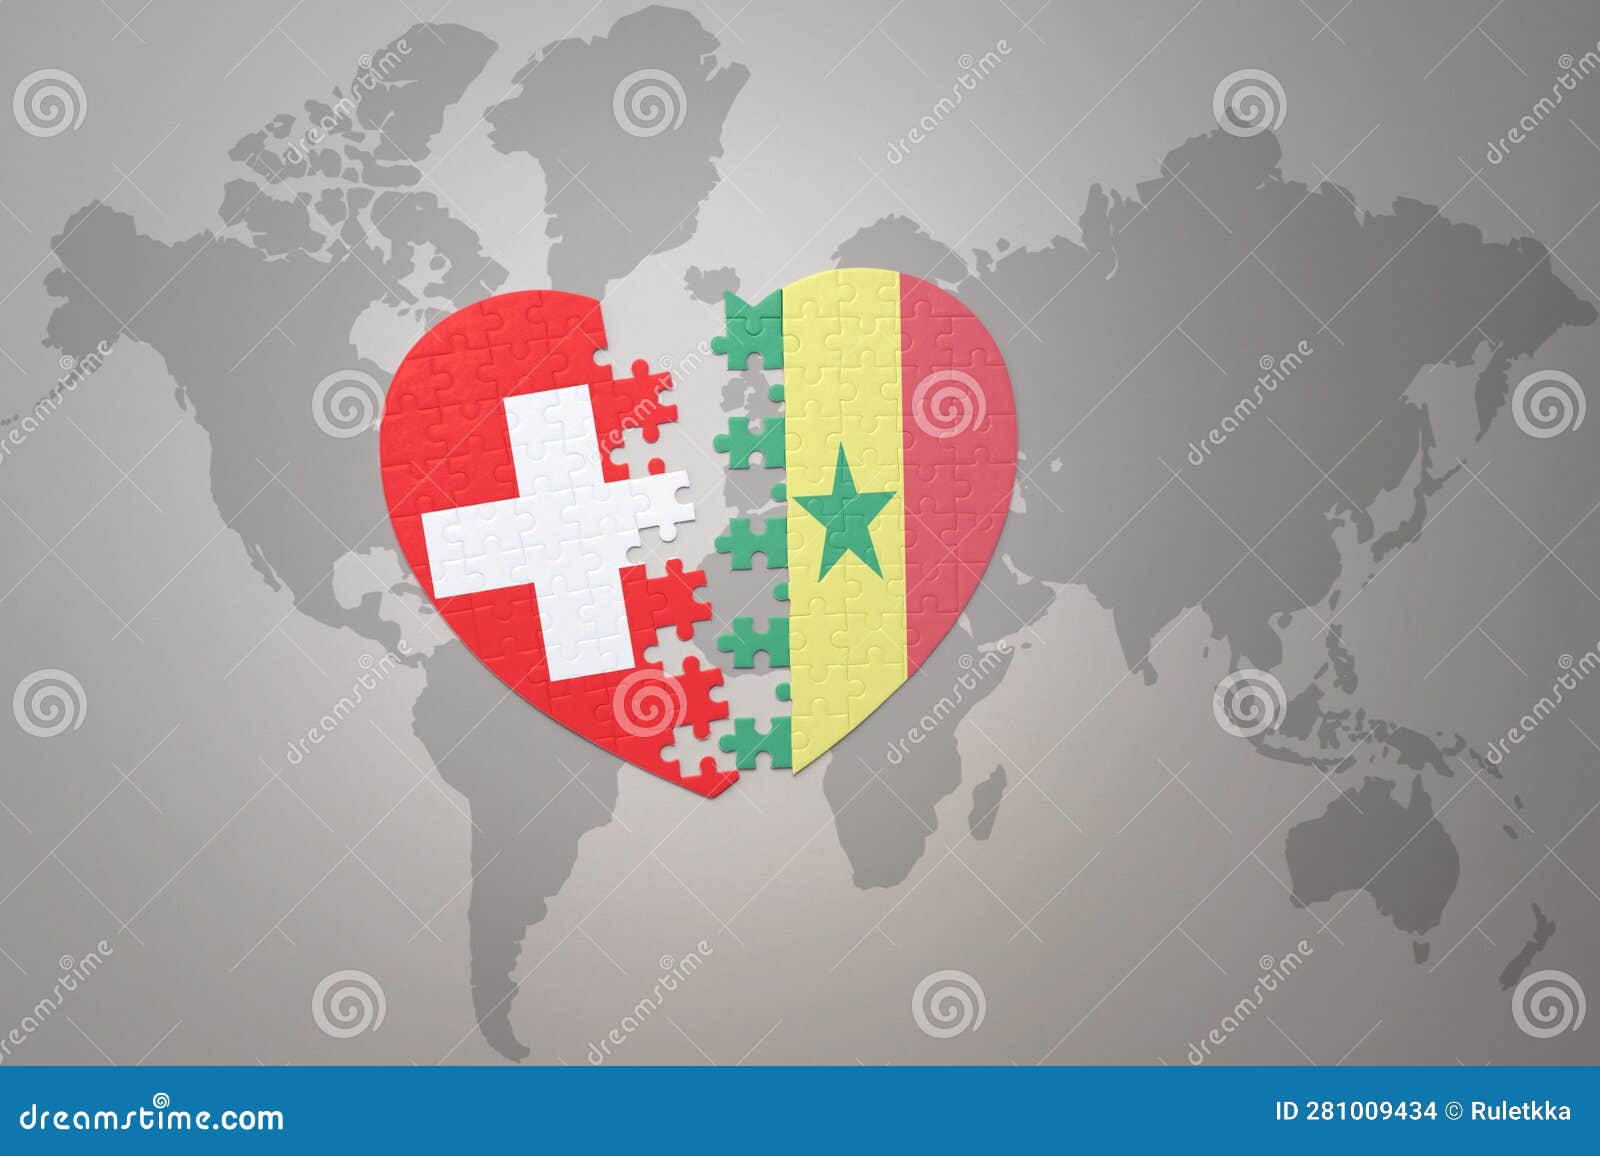 Senegal flag and world map background